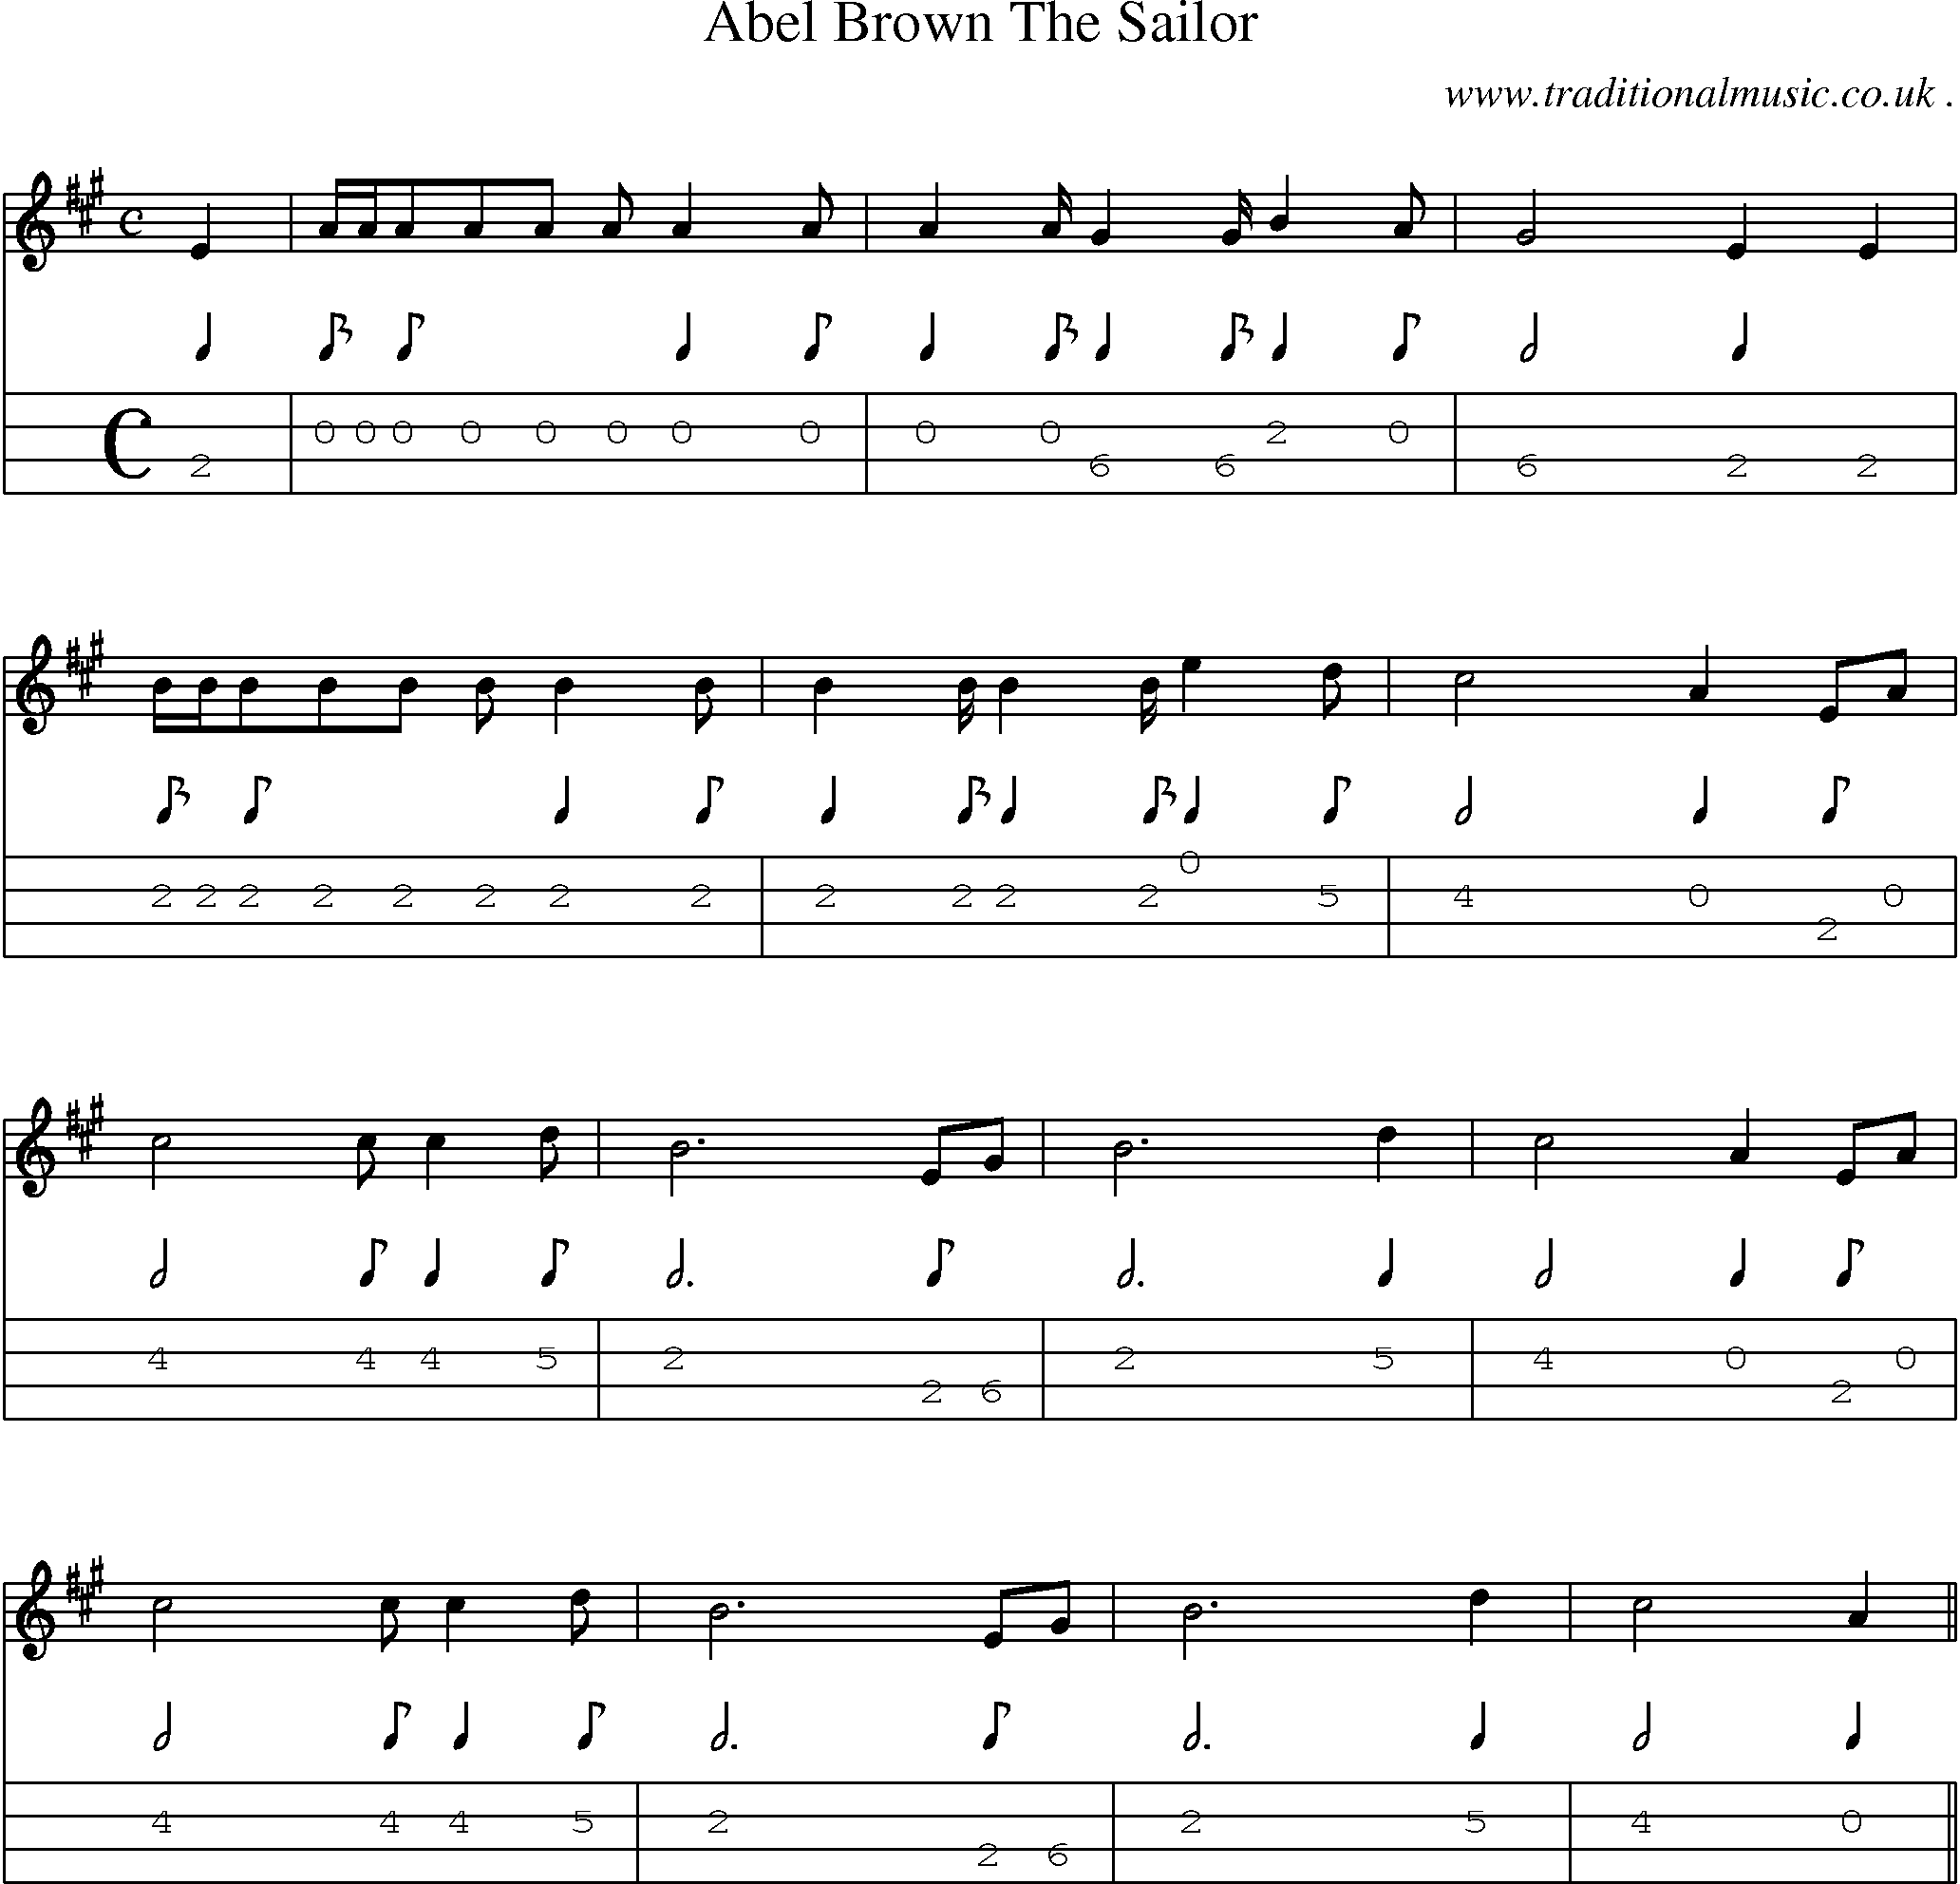 Sheet-Music and Mandolin Tabs for Abel Brown The Sailor